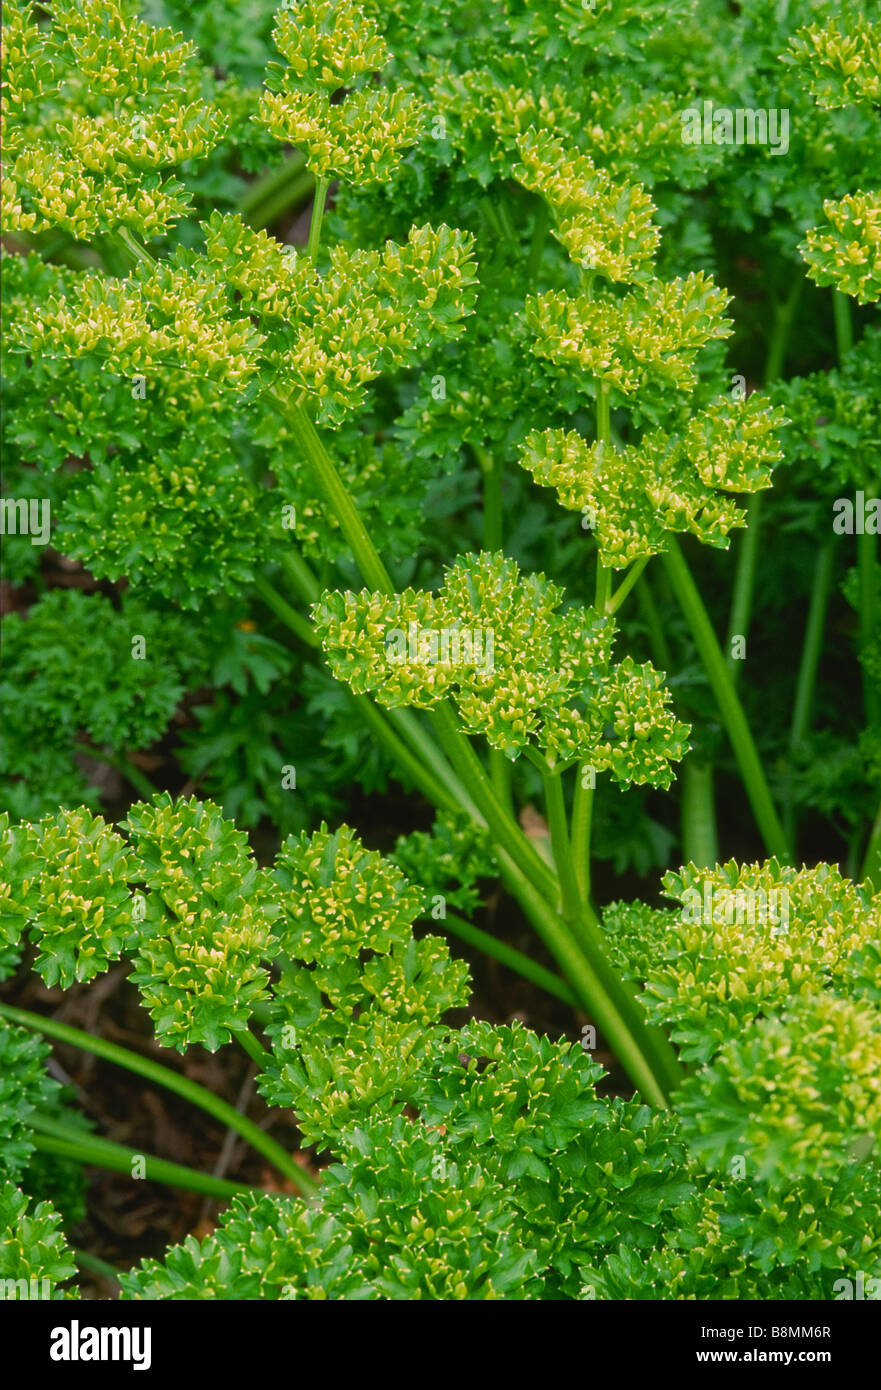 Curly parsley plant growing in a garden Stock Photo